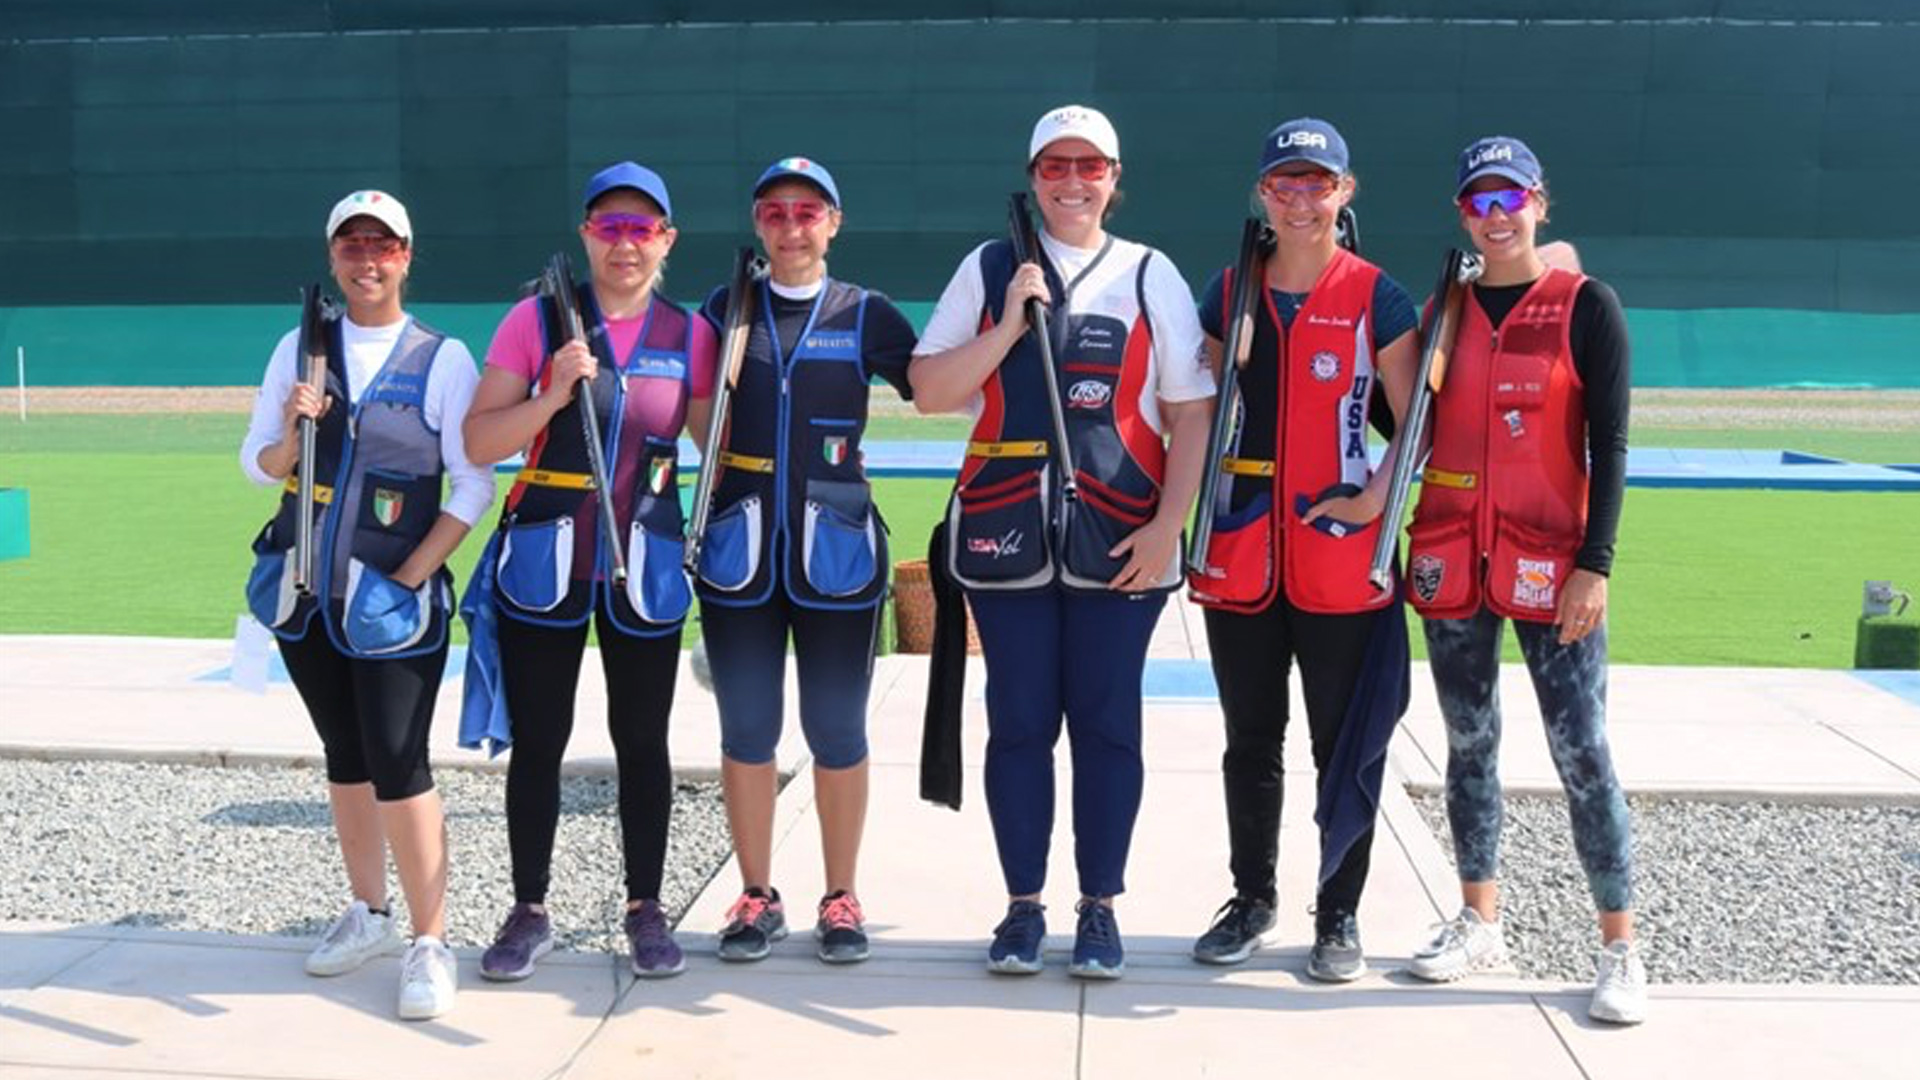 Women&#x27;s skeet competitors at 2022 Lima World Cup